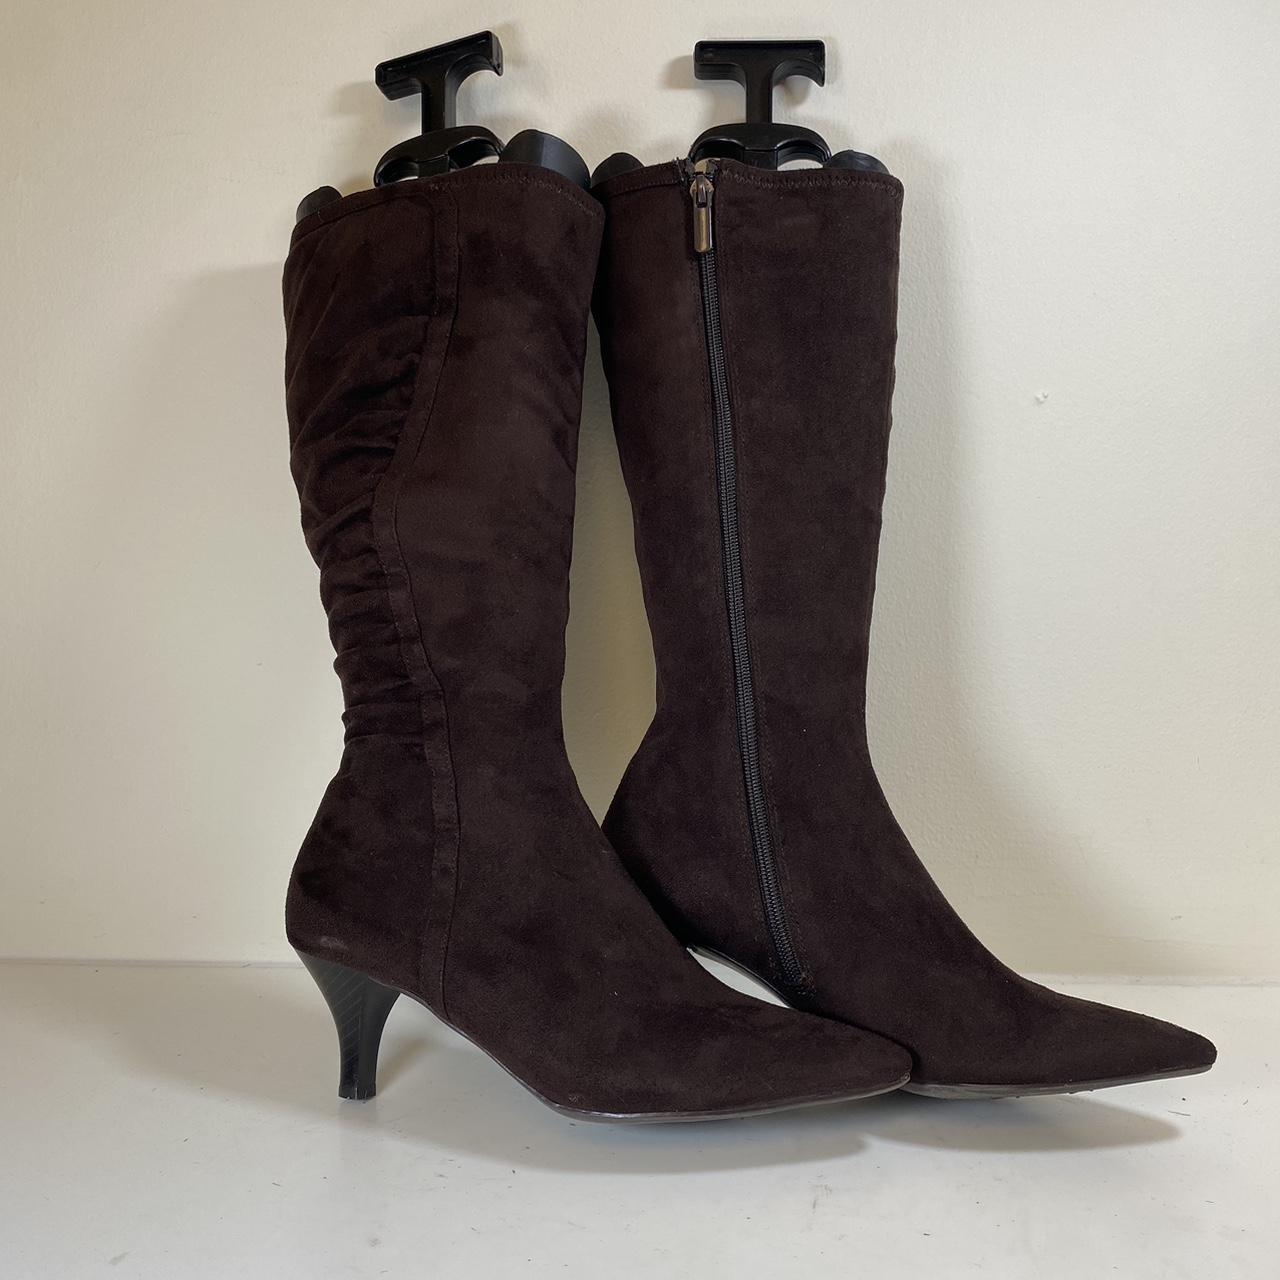 Impo Women's Brown and Black Boots (3)